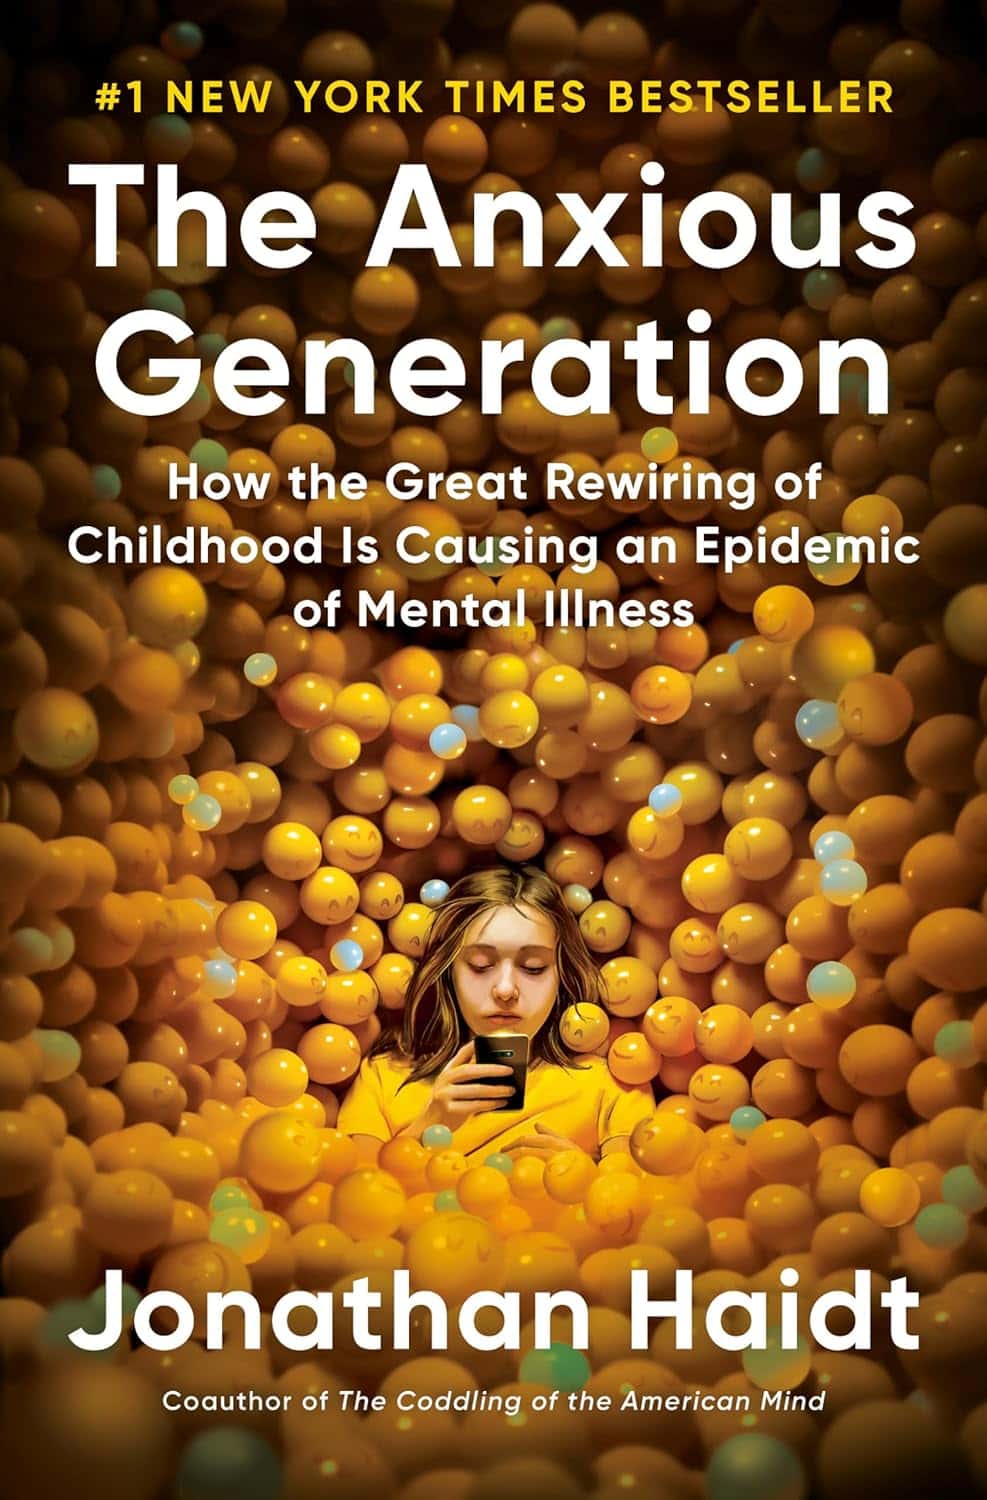 Book Cover Of &Quot;The Anxious Generation&Quot; By Jonathan Haidt, Featuring A Young Woman Surrounded By Colorful Balls, Looking Contemplative, With Text About The Book'S Focus On Childhood And Mental Illness. - Best Charter School Texas Education